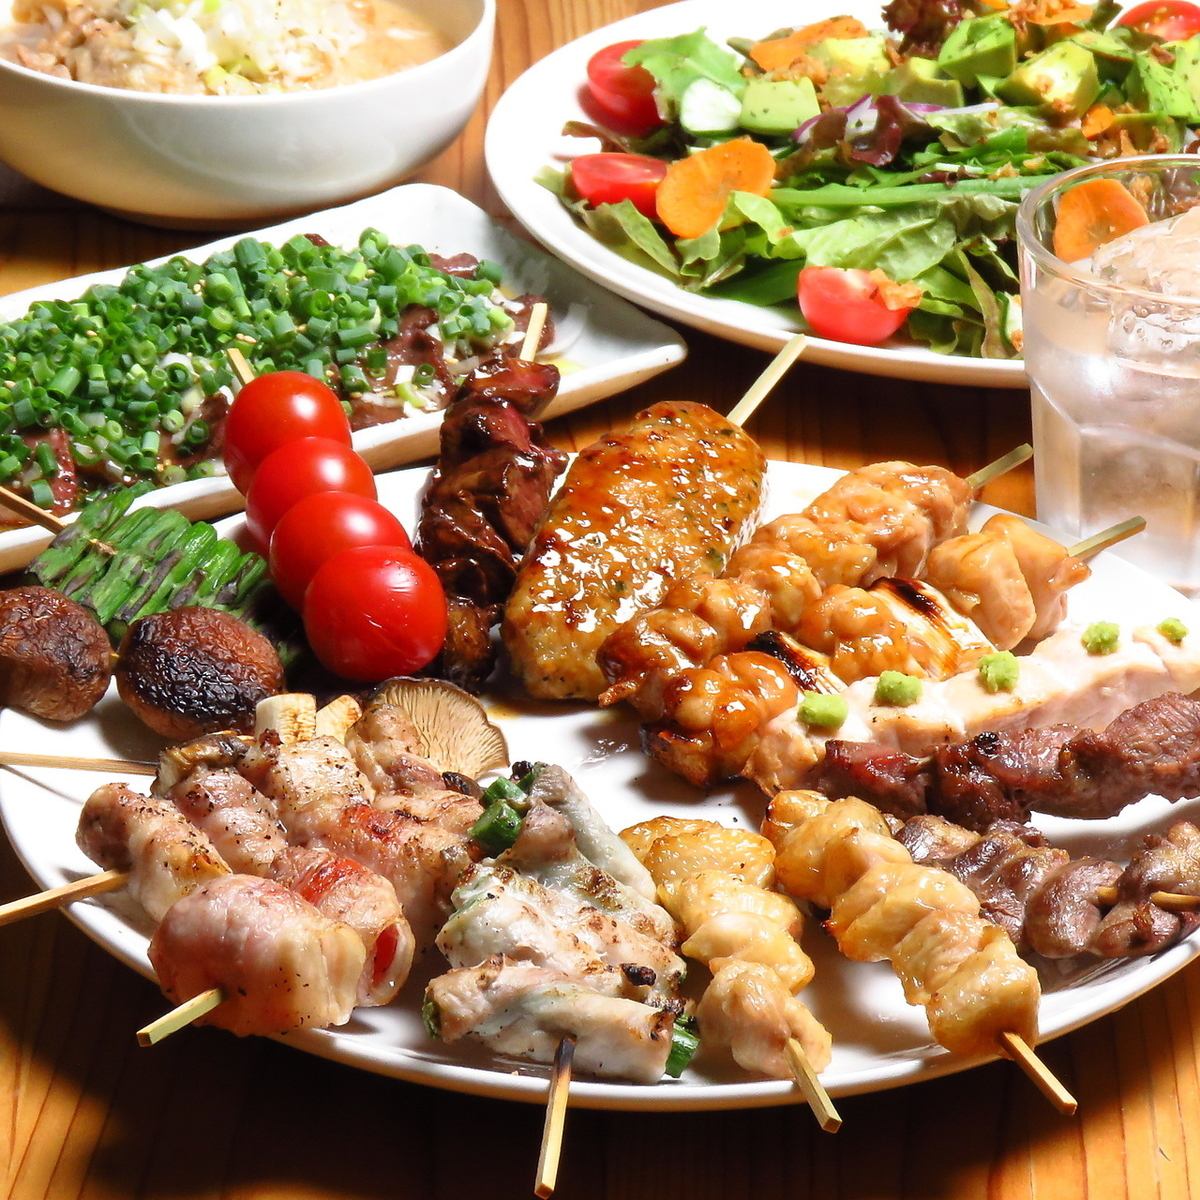 We have a wide variety of skewers on our menu, including chicken, pork, beef tongue, and vegetable skewers!